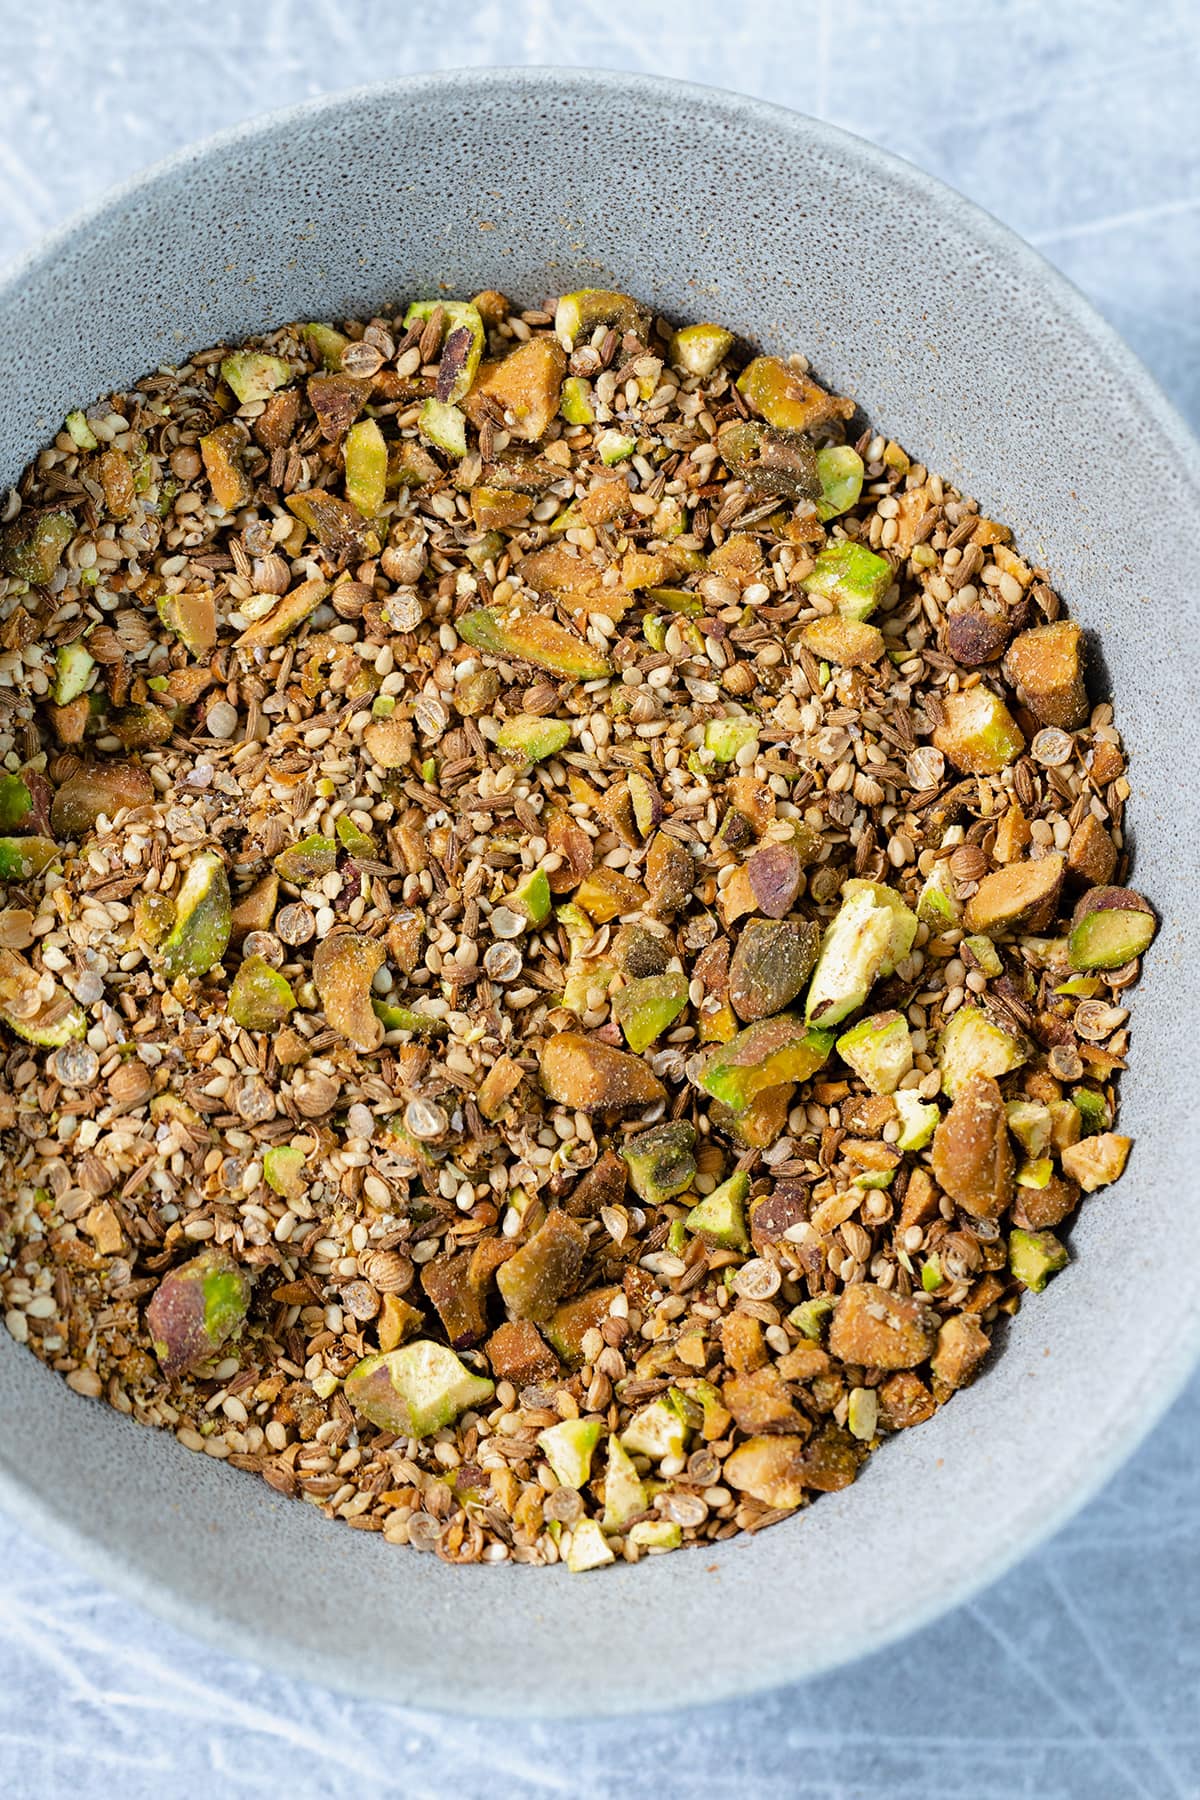 Pistachio dukkah in a grey bowl. Shot from above, a close up.